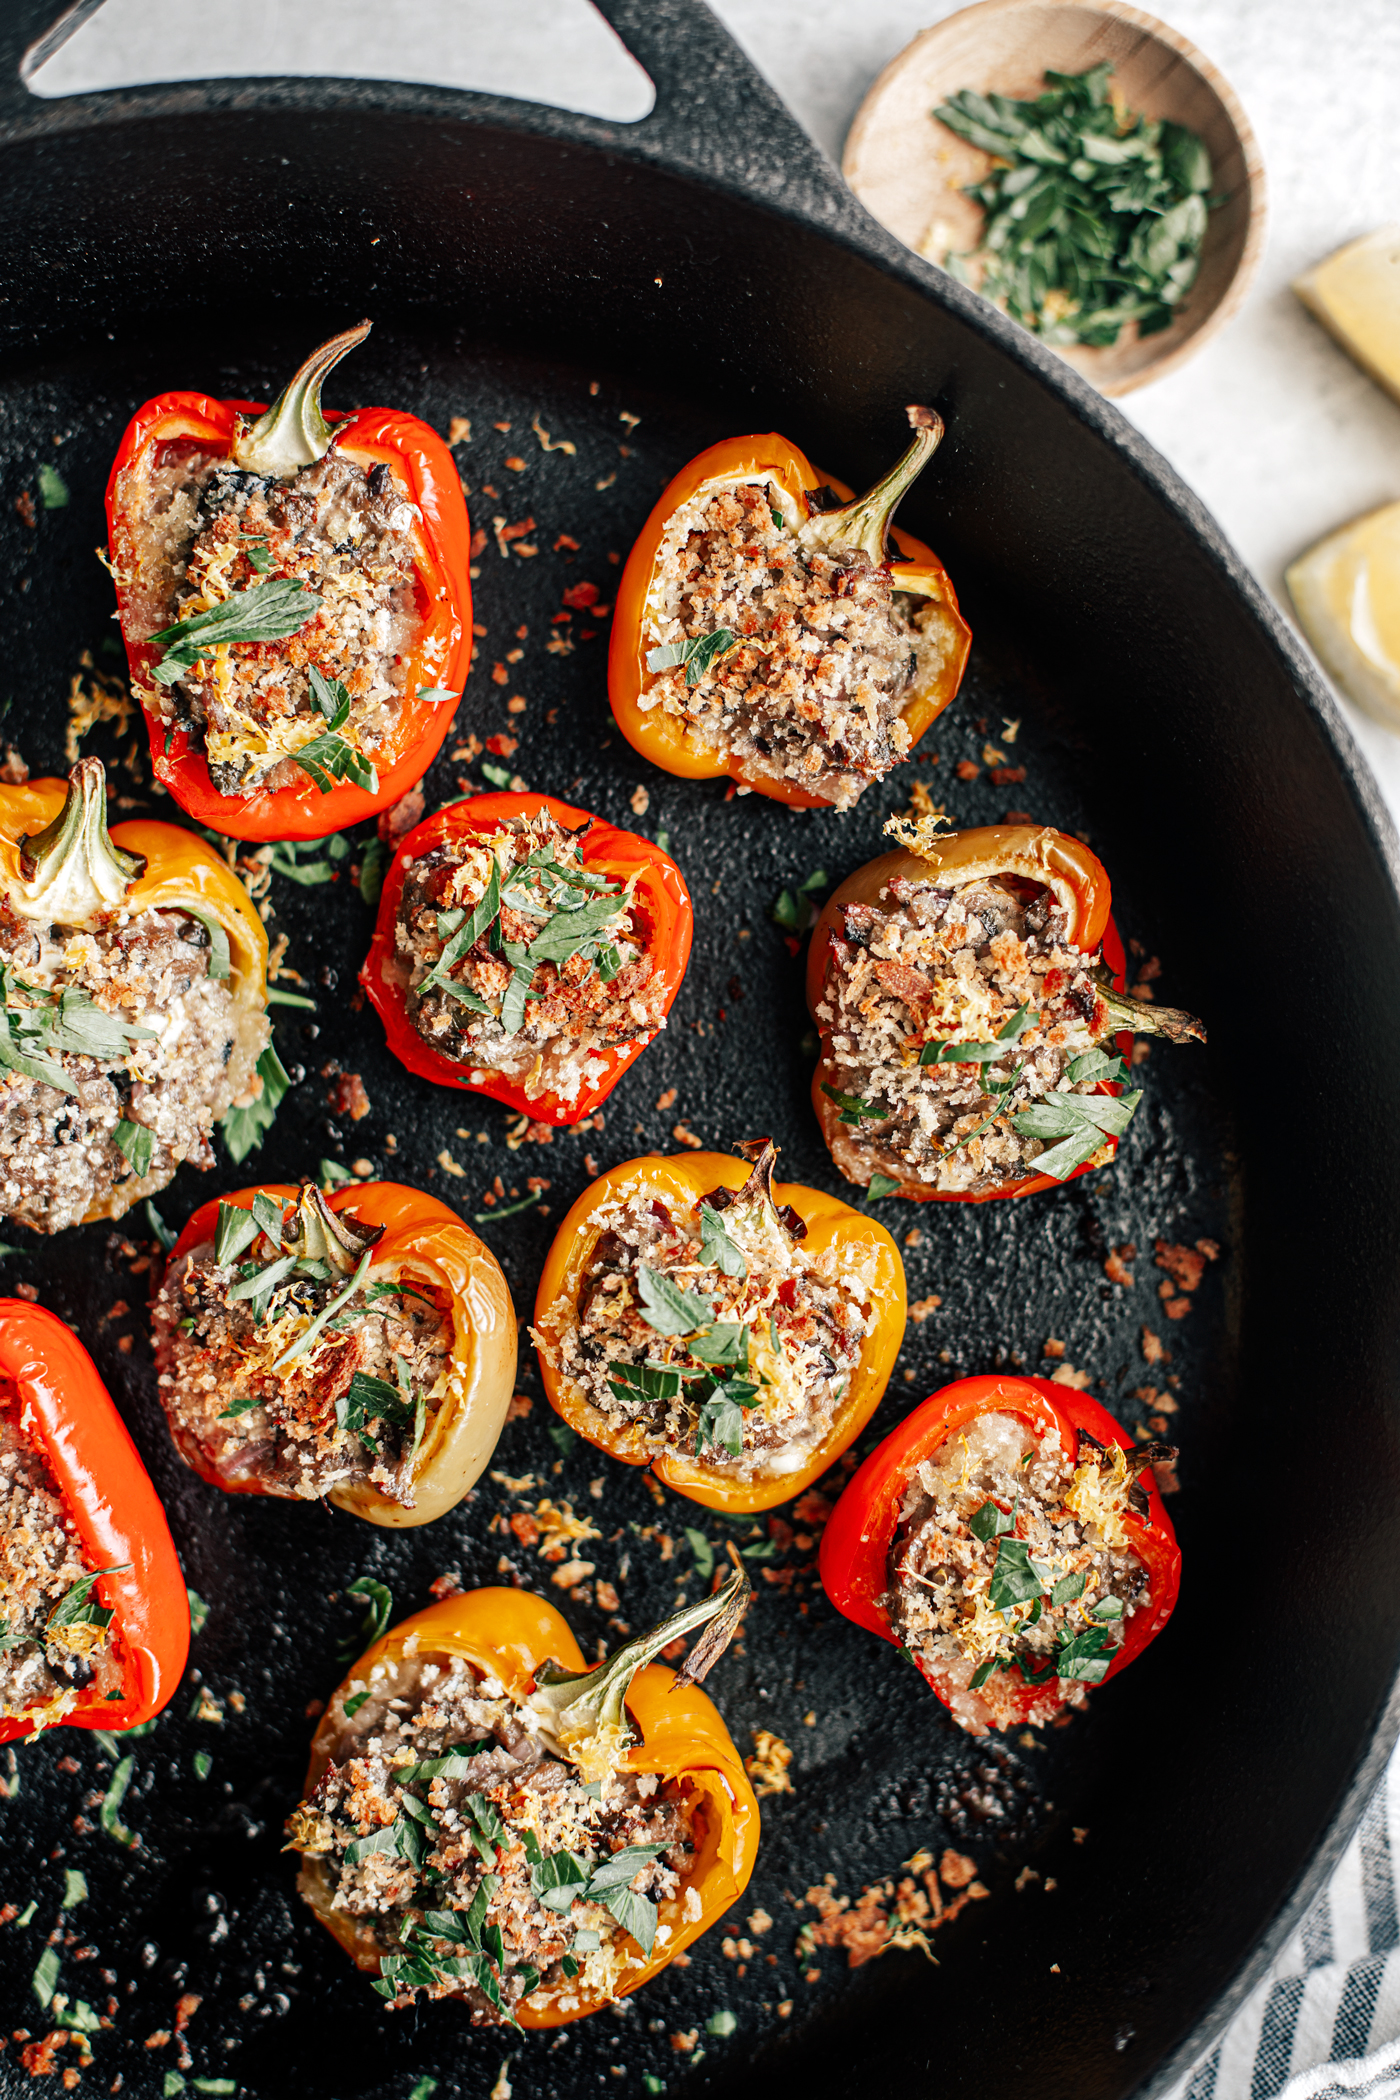 Cast iron pan with baked stuffed mini peppers covered in toasted breadcrumbs.